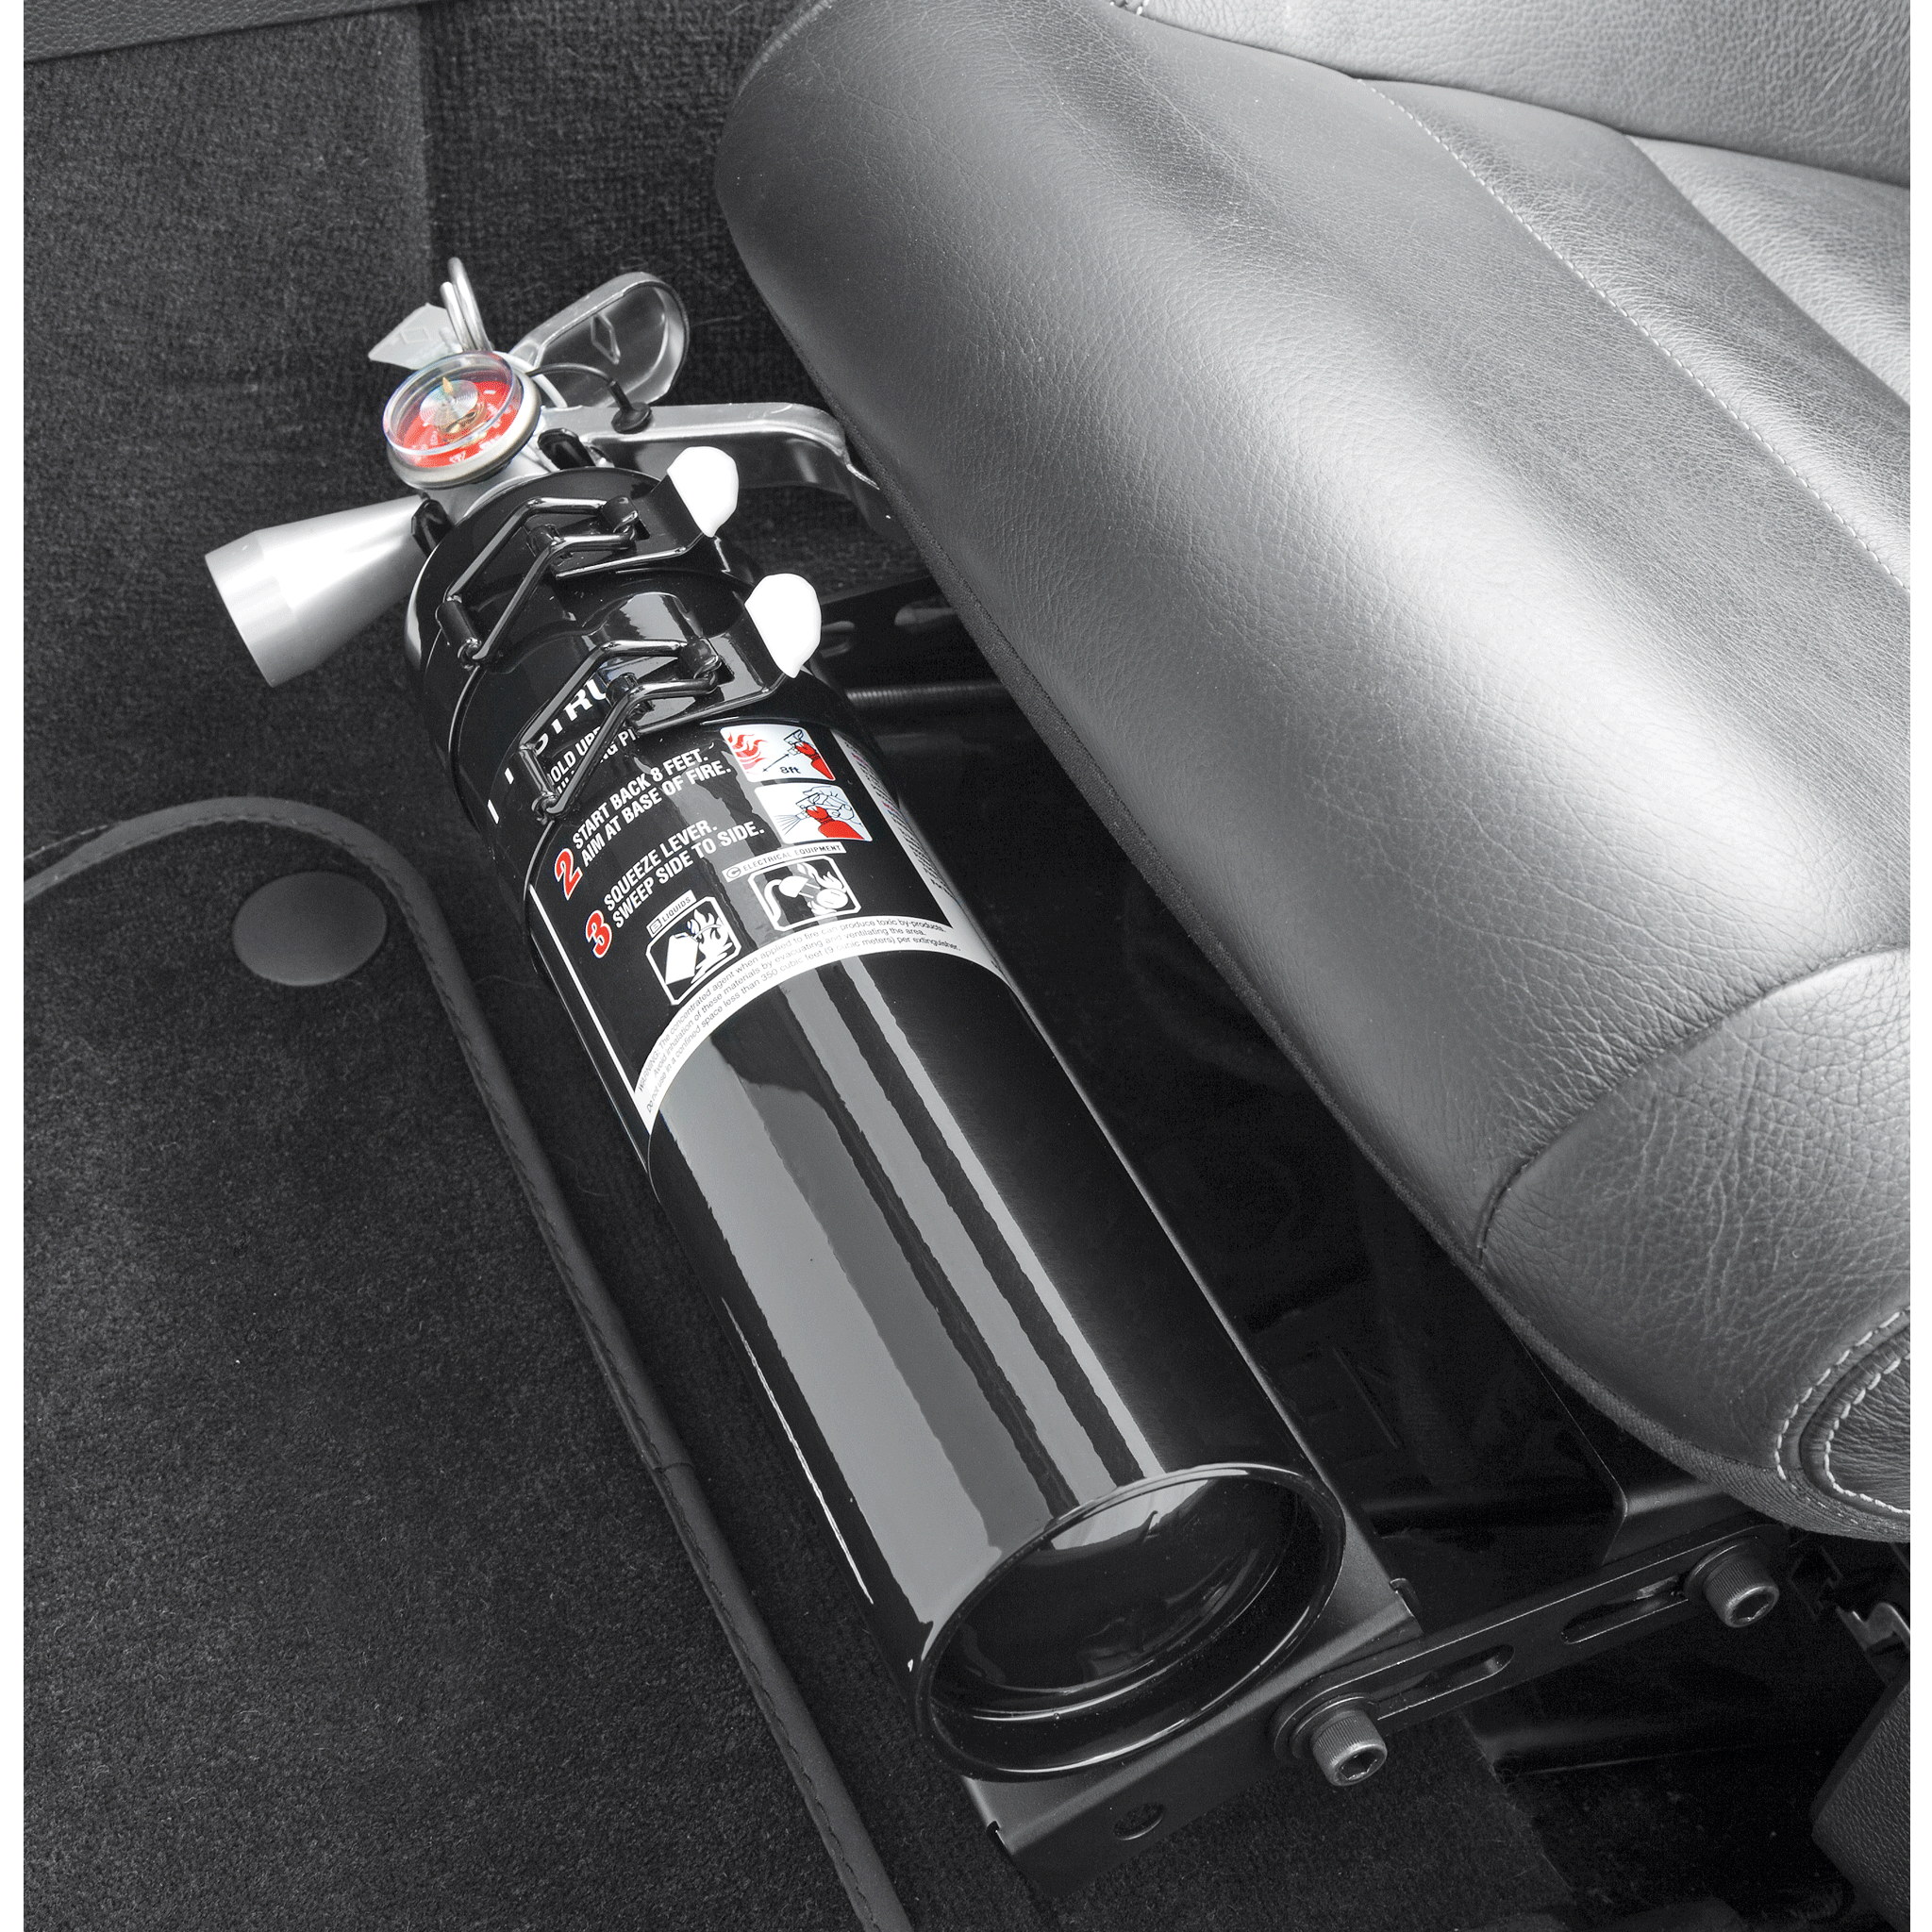 MaxOut Dry Chemical Car Fire Extinguisher - 2.5 lb.